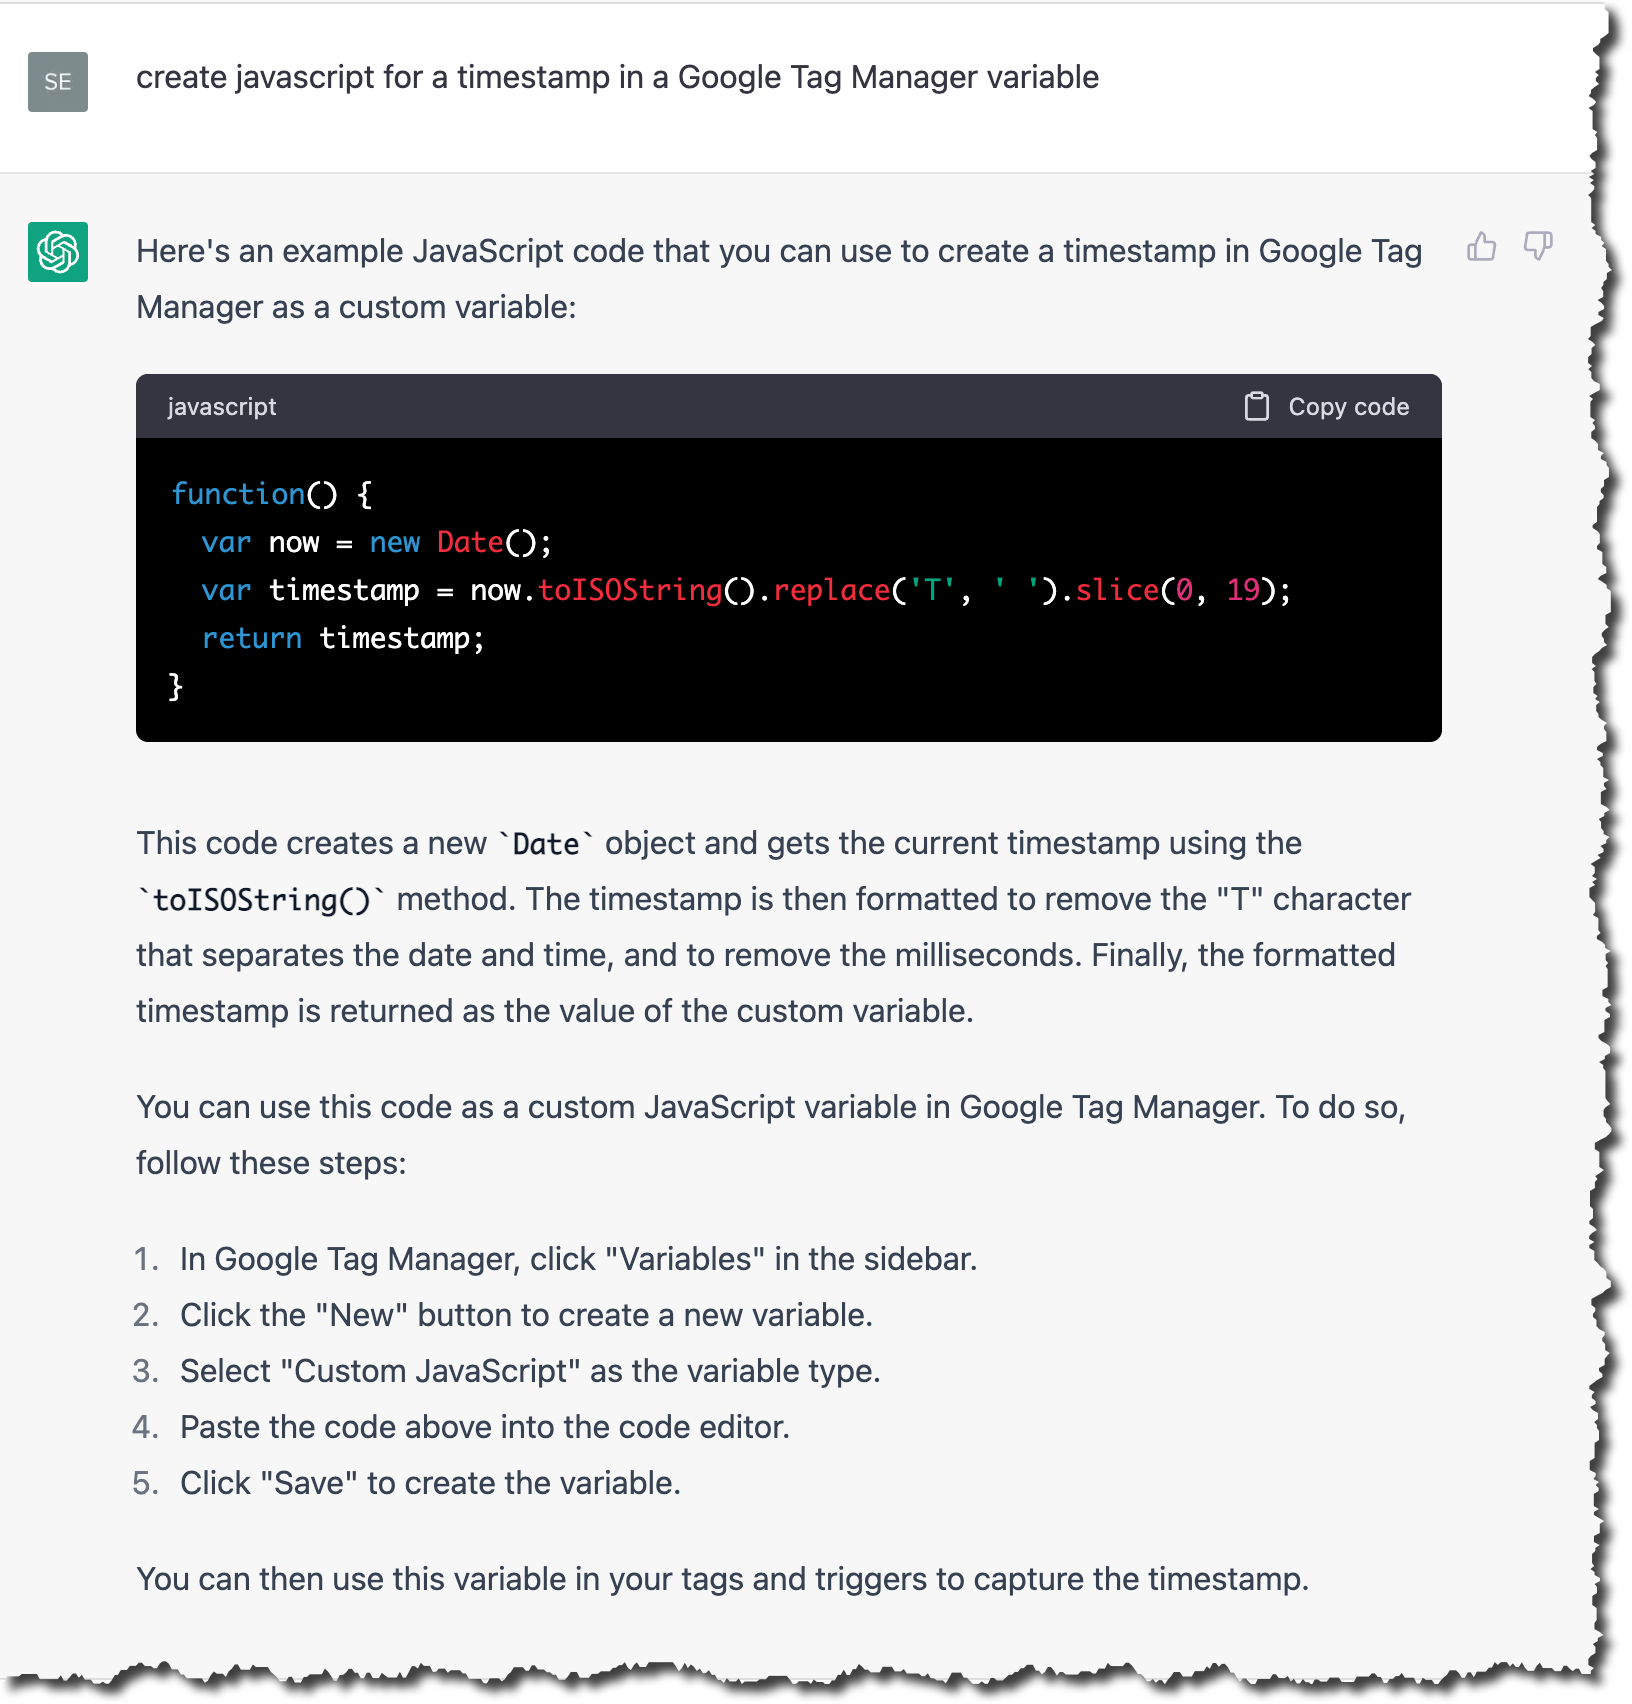 Image showing the screen capture of the ChatGPT response to the question 'create javascript for a timestamp in a Google Tag Manager variable'